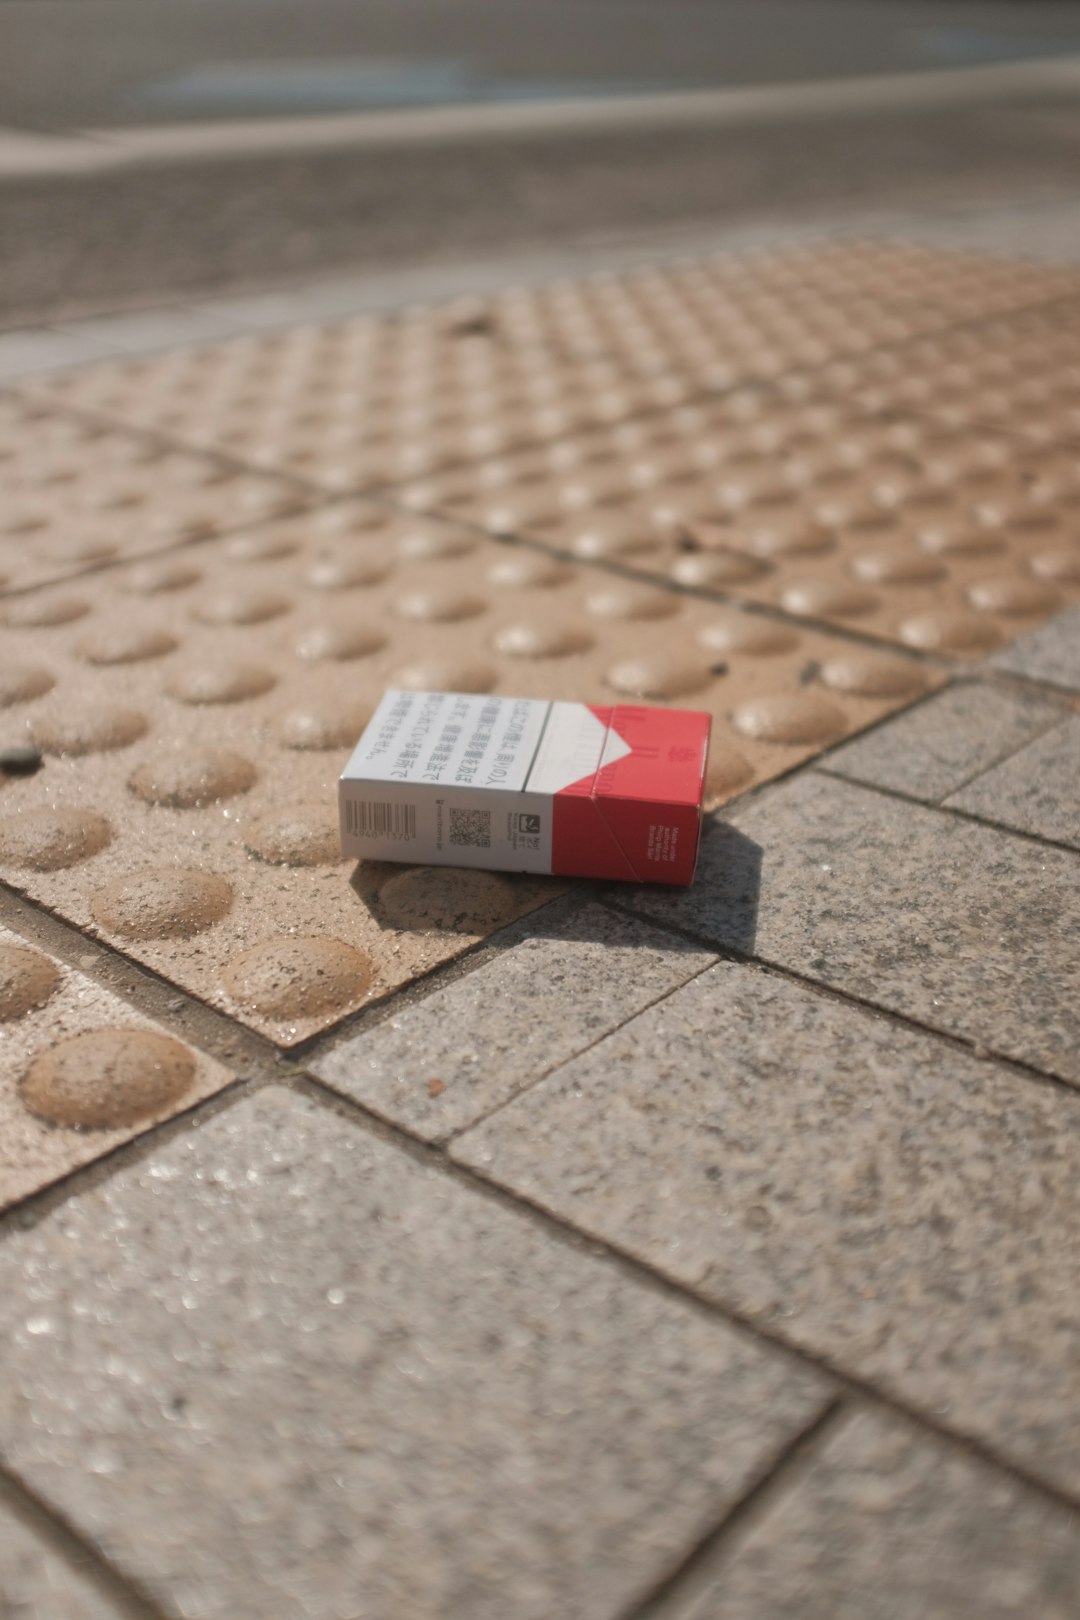 red and white marlboro cigarette pack on brown and white ceramic tiles